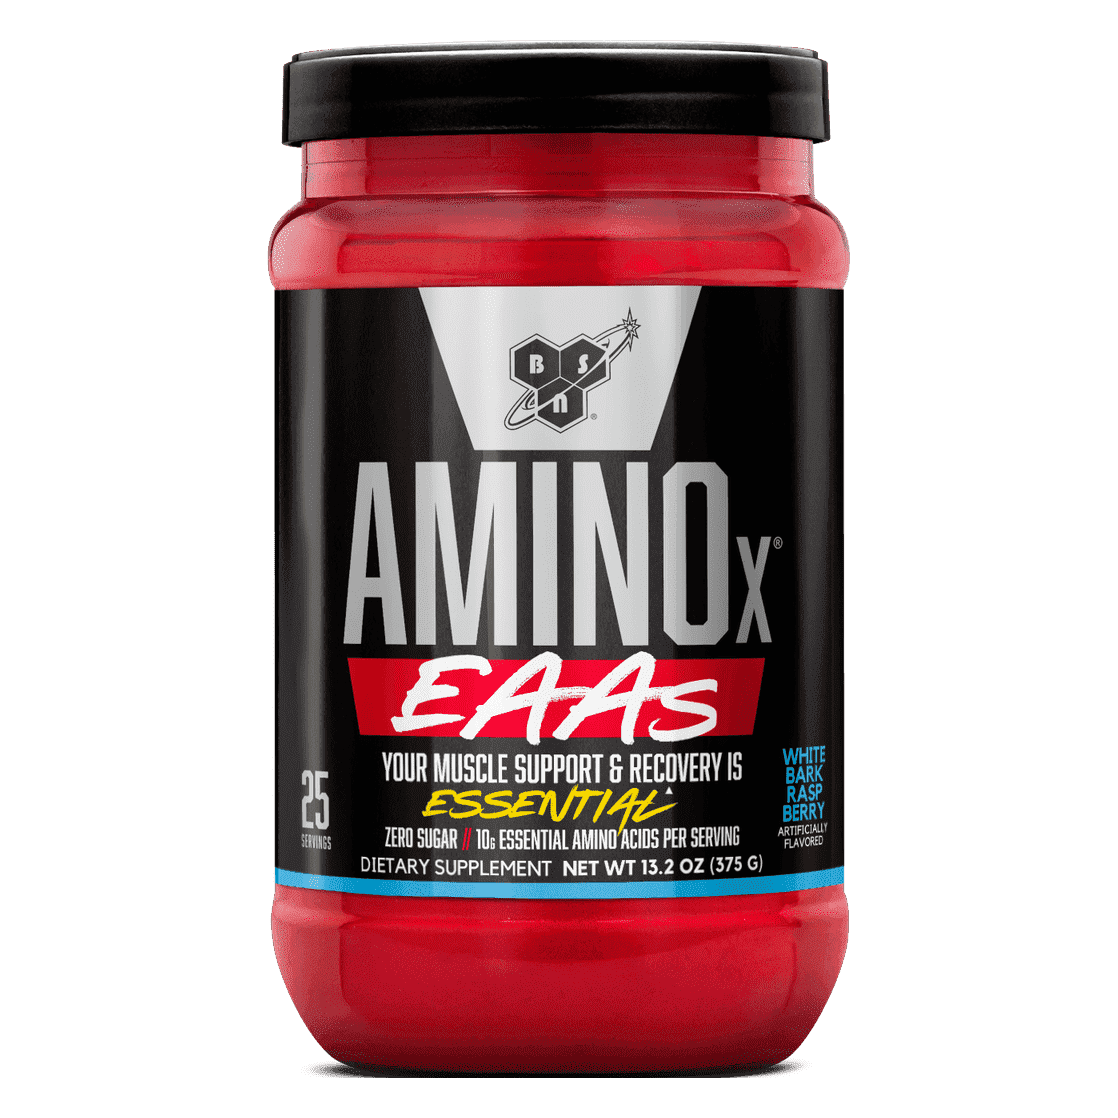 Amino x eaa's by bsn -25 Serve - Stacked Supps